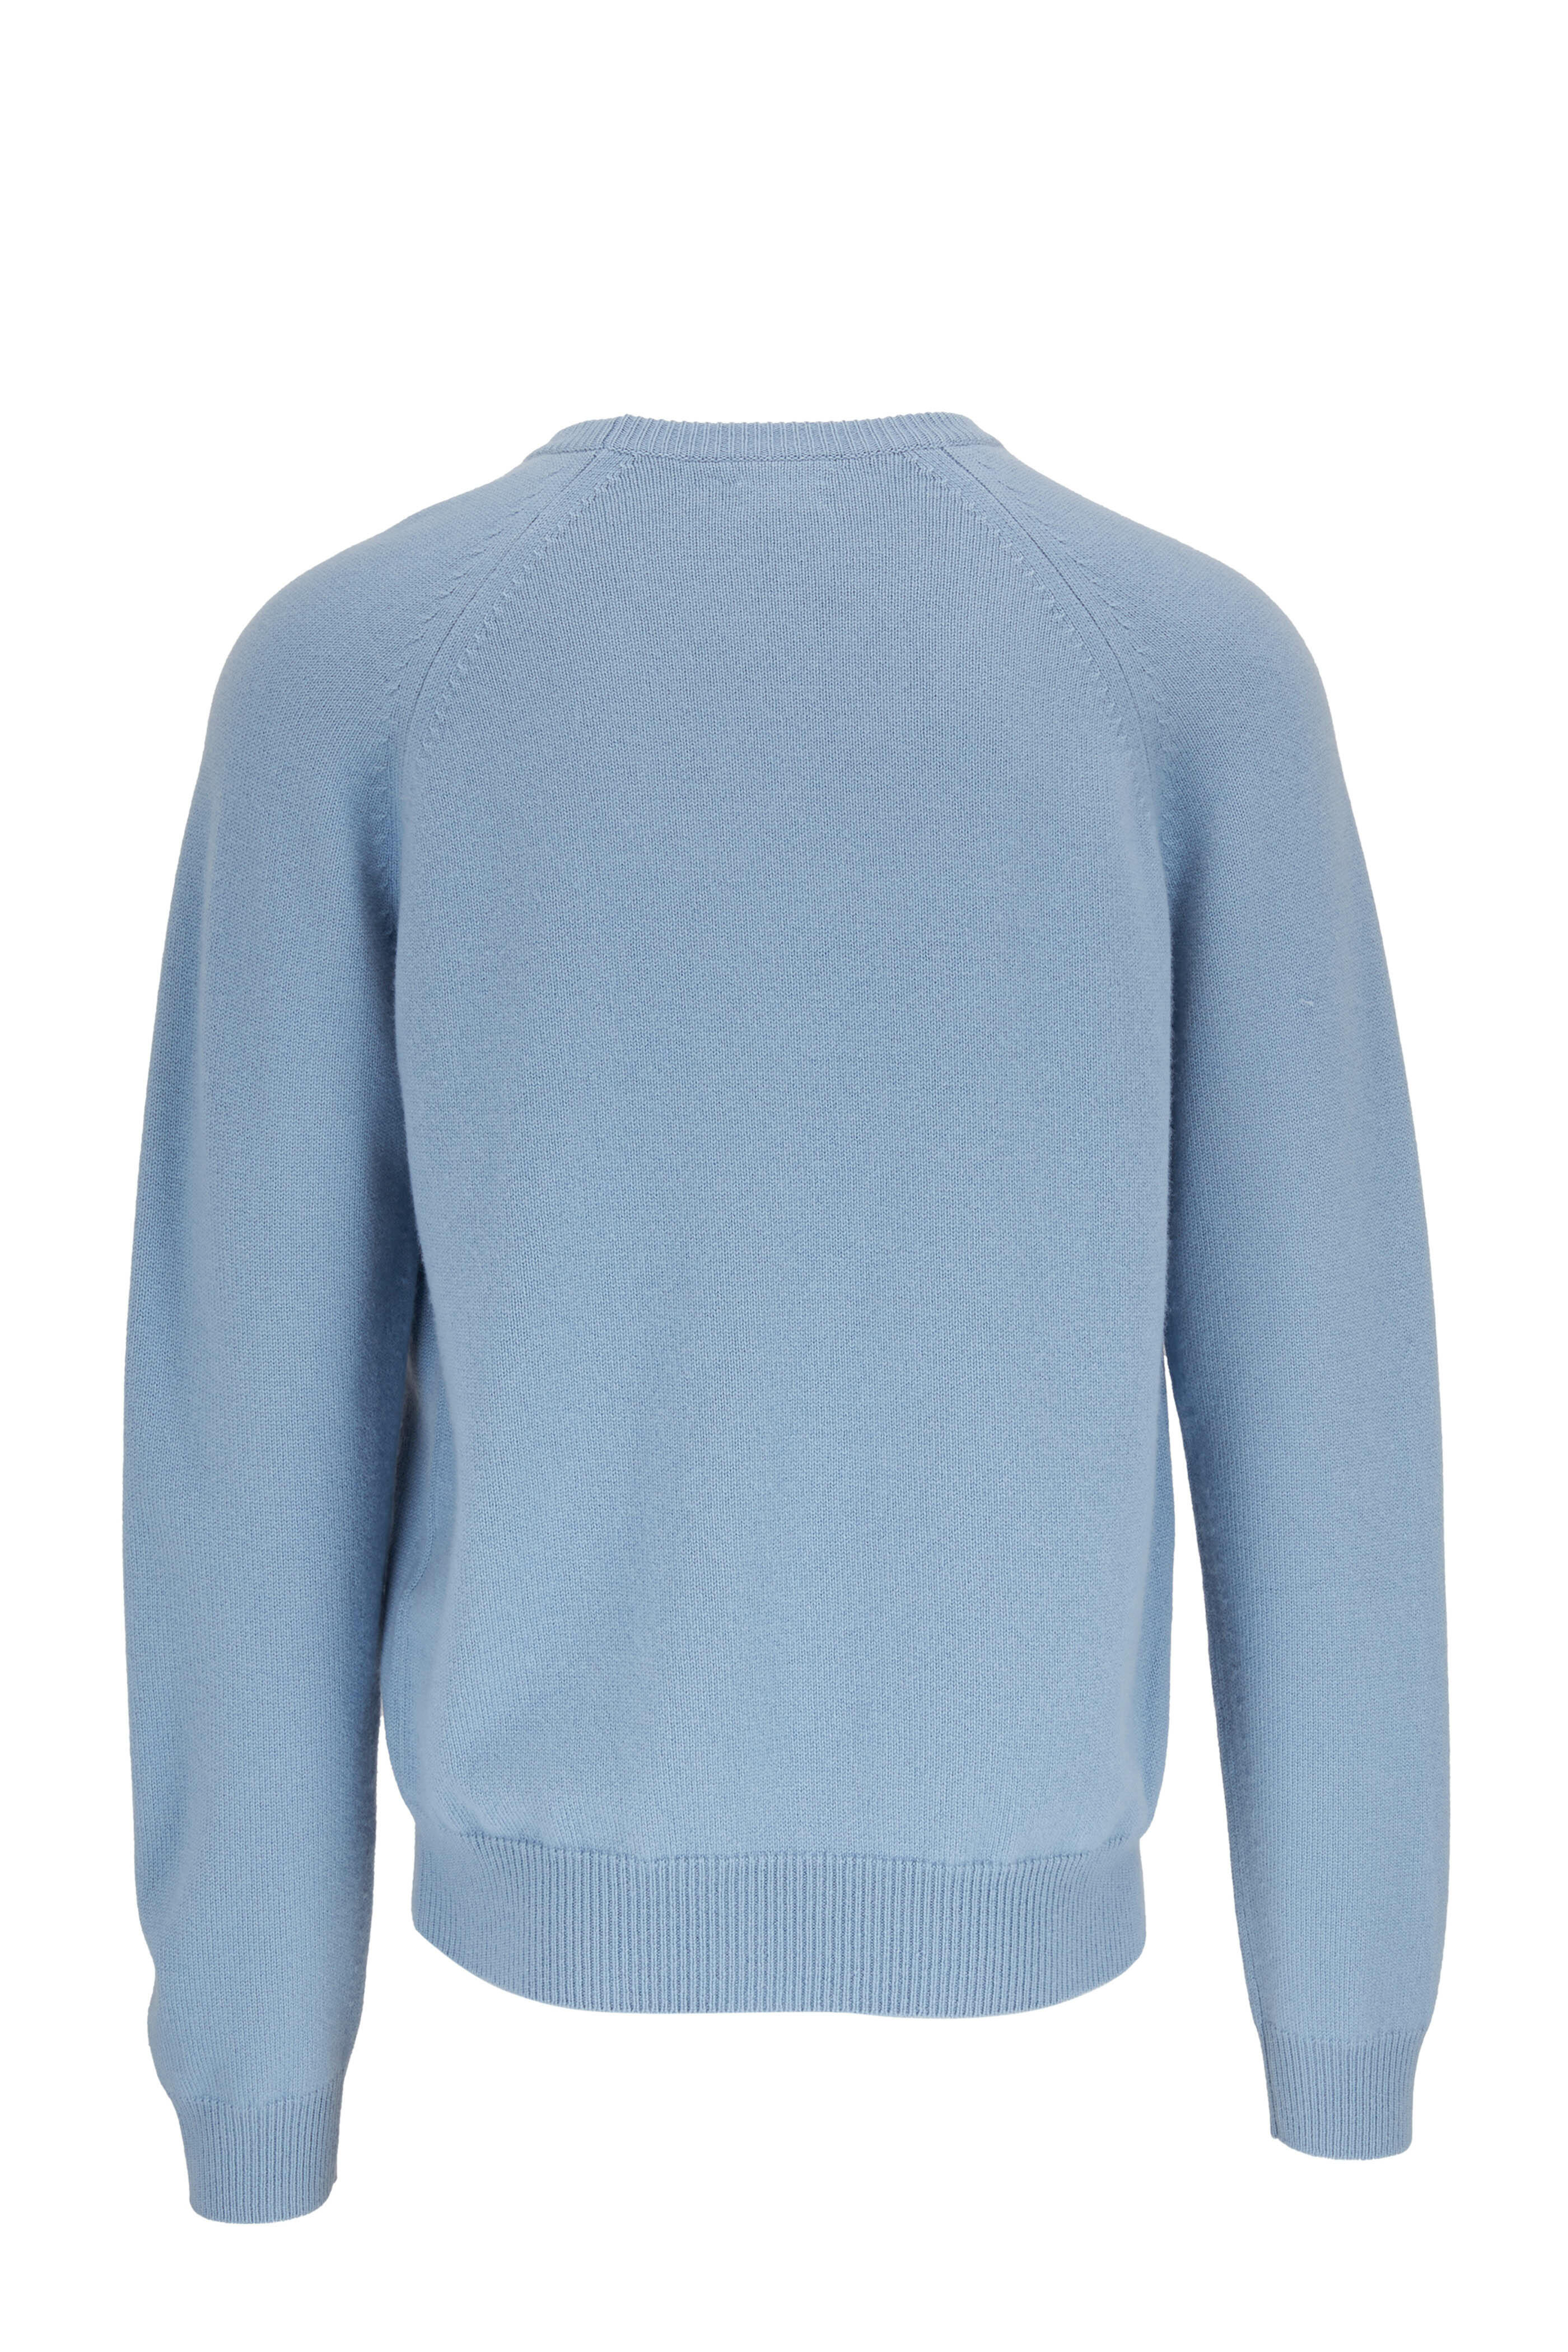 Tom Ford - Light Blue Cashmere Crewneck Sweater | Mitchell Stores